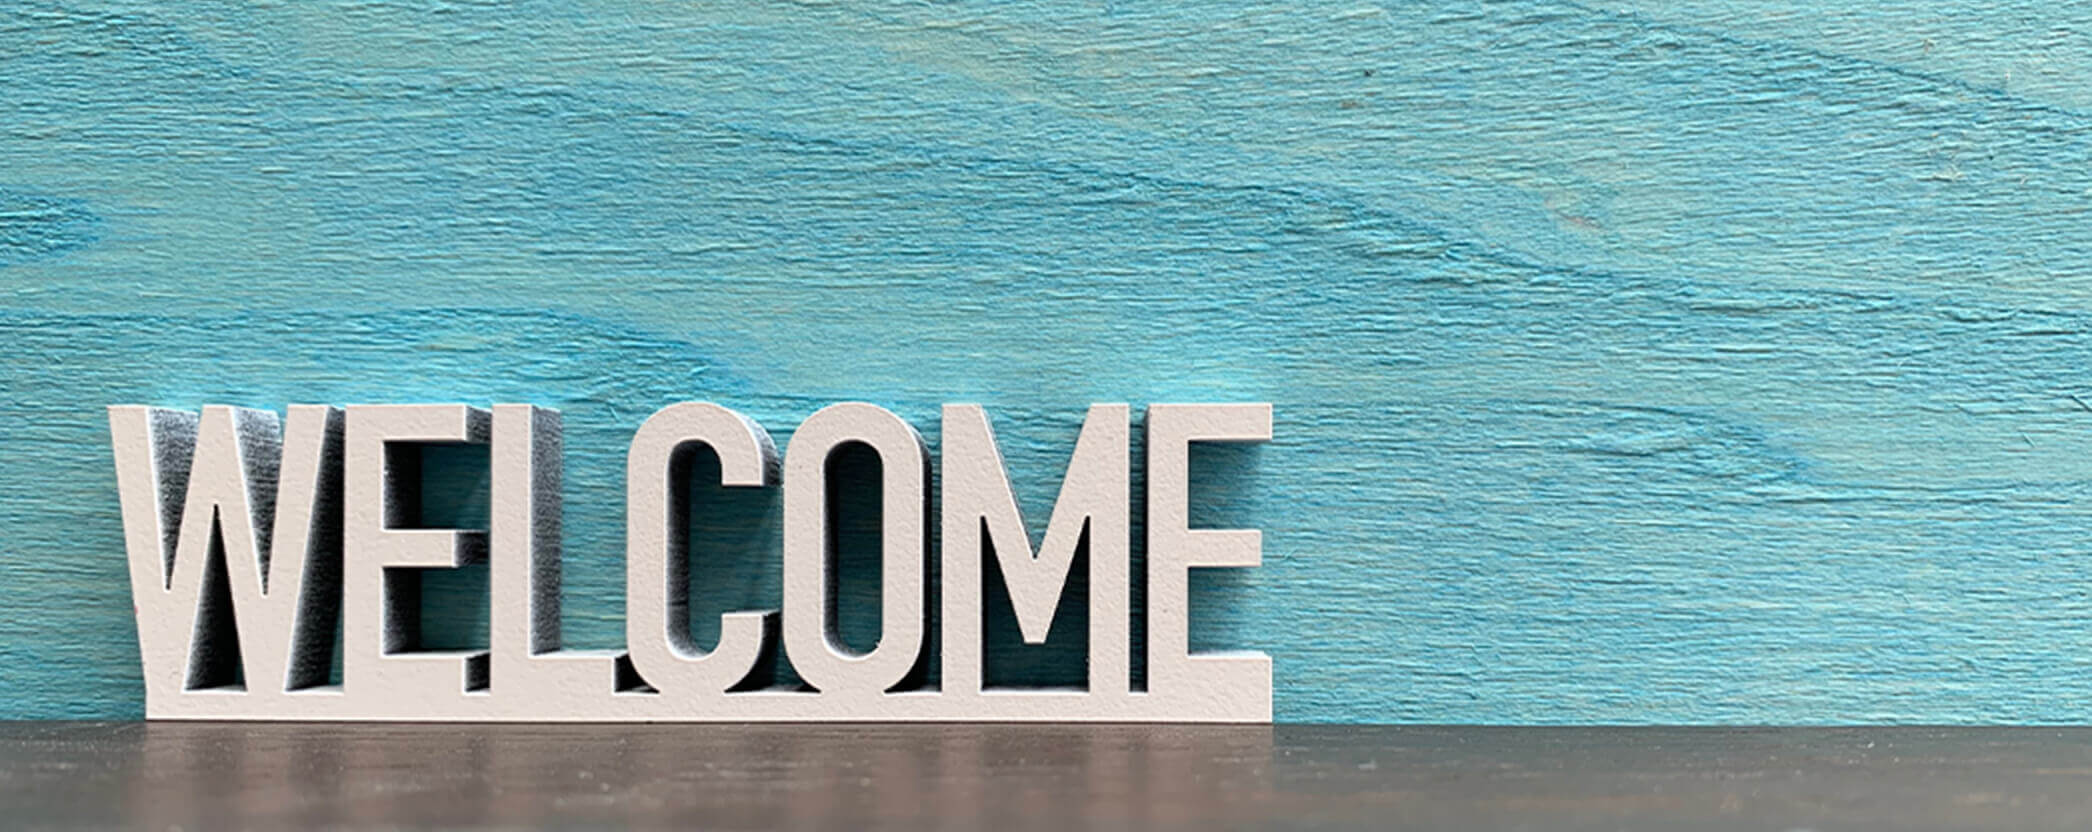 Welcome sign on teal background.